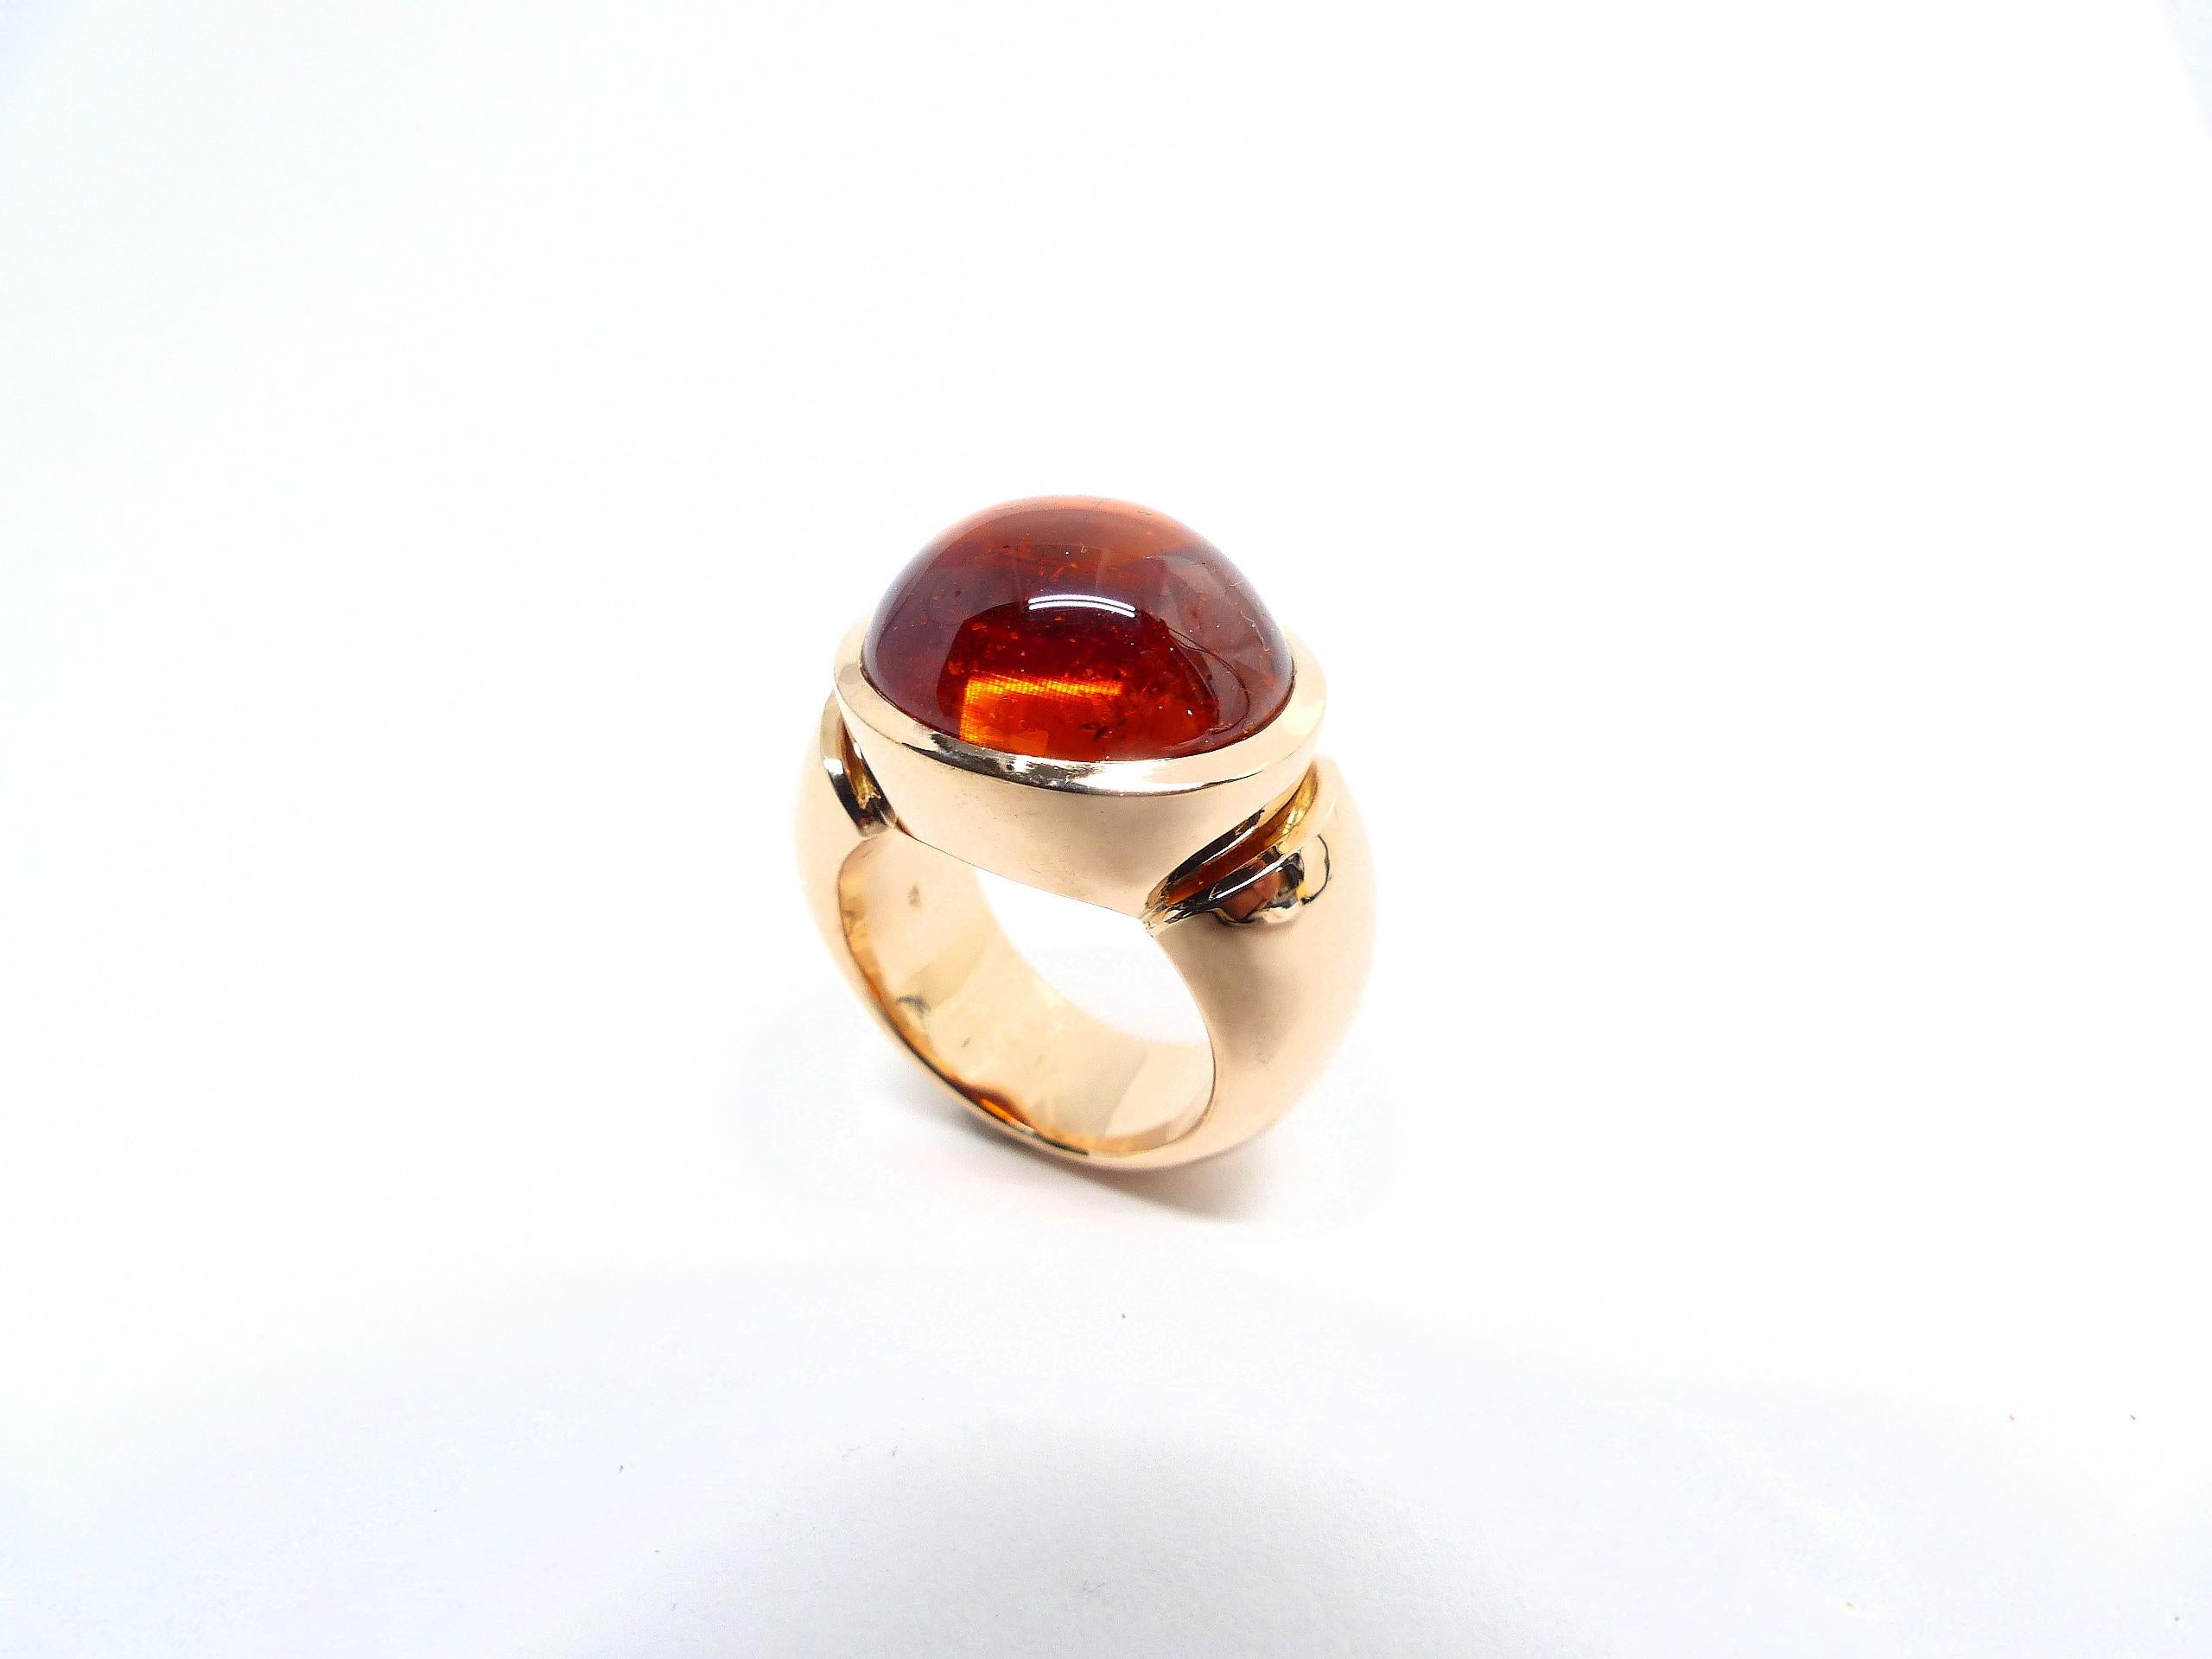 Thomas Leyser is renowned for his contemporary jewellery designs utilizing fine gemstones.

This 18k red gold ring (32.35g) is set with 1x fine Mandarine Garnet Cabouchon in magnificient deep orange colour (16.5x14.5mm, 26.23ct). Ringsize 53.5 (6